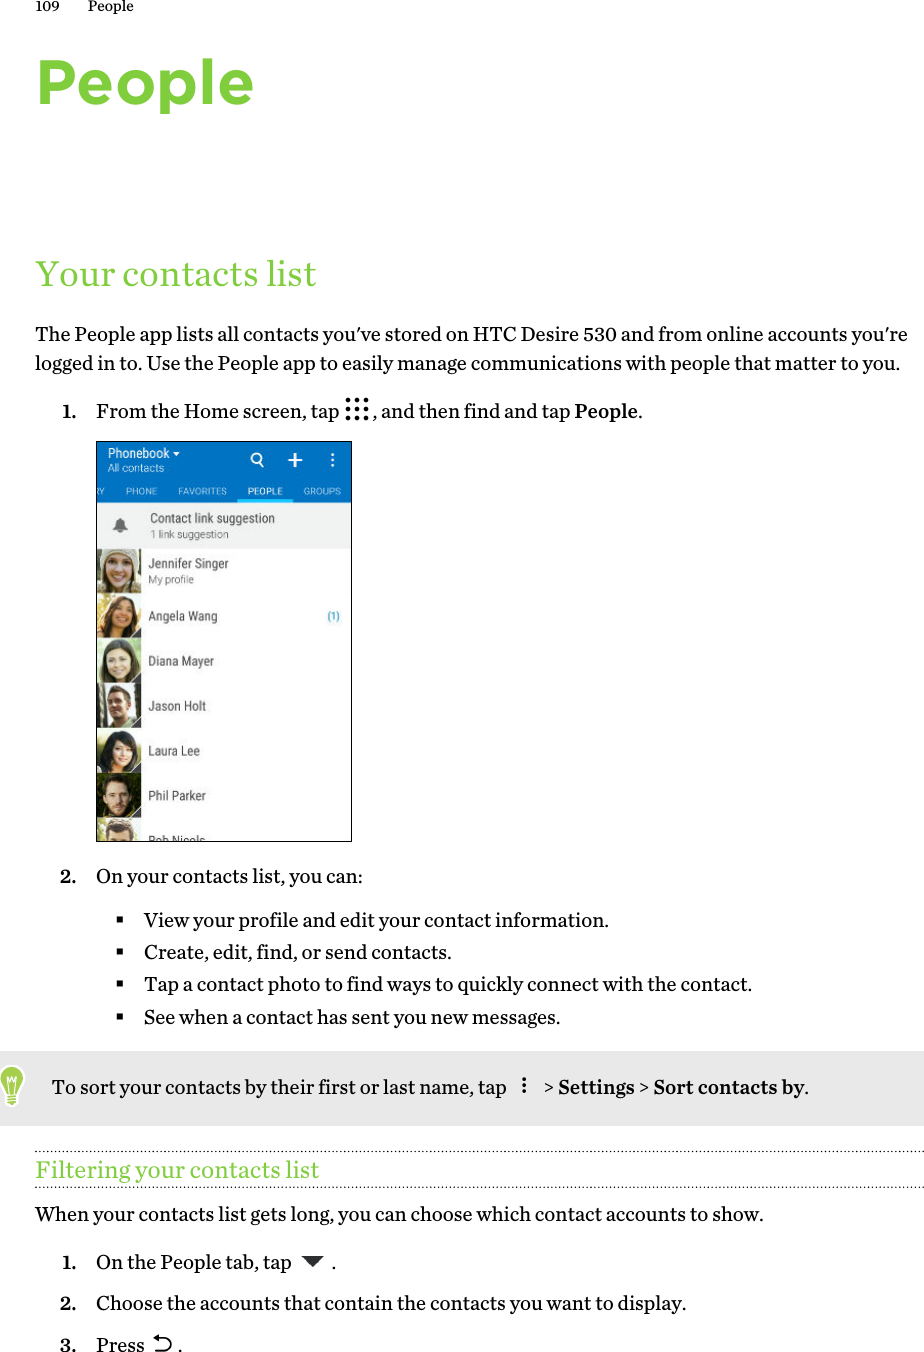 PeopleYour contacts listThe People app lists all contacts you&apos;ve stored on HTC Desire 530 and from online accounts you&apos;relogged in to. Use the People app to easily manage communications with people that matter to you.1. From the Home screen, tap  , and then find and tap People. 2. On your contacts list, you can:§View your profile and edit your contact information.§Create, edit, find, or send contacts.§Tap a contact photo to find ways to quickly connect with the contact.§See when a contact has sent you new messages.To sort your contacts by their first or last name, tap   &gt; Settings &gt; Sort contacts by.Filtering your contacts listWhen your contacts list gets long, you can choose which contact accounts to show.1. On the People tab, tap  .2. Choose the accounts that contain the contacts you want to display.3. Press  .109 People